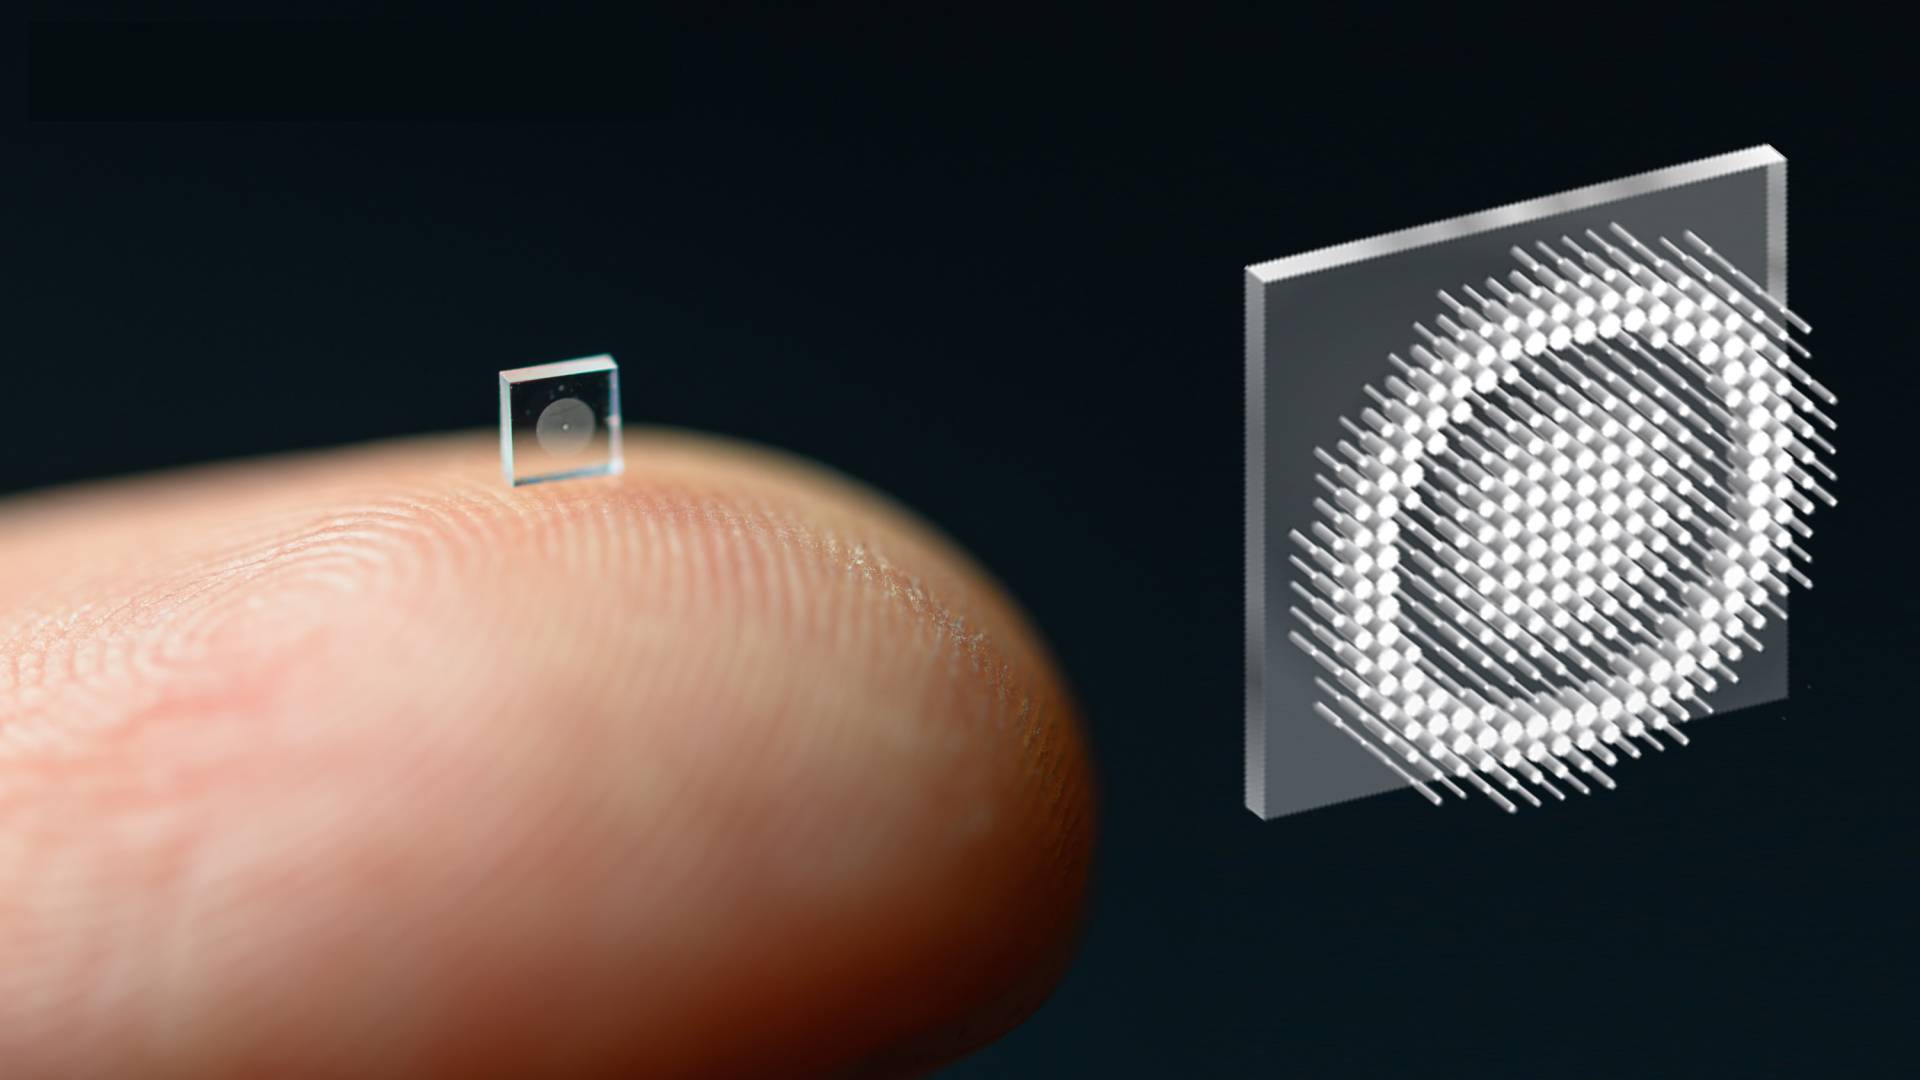 Tiny camera shown on a human fingertip